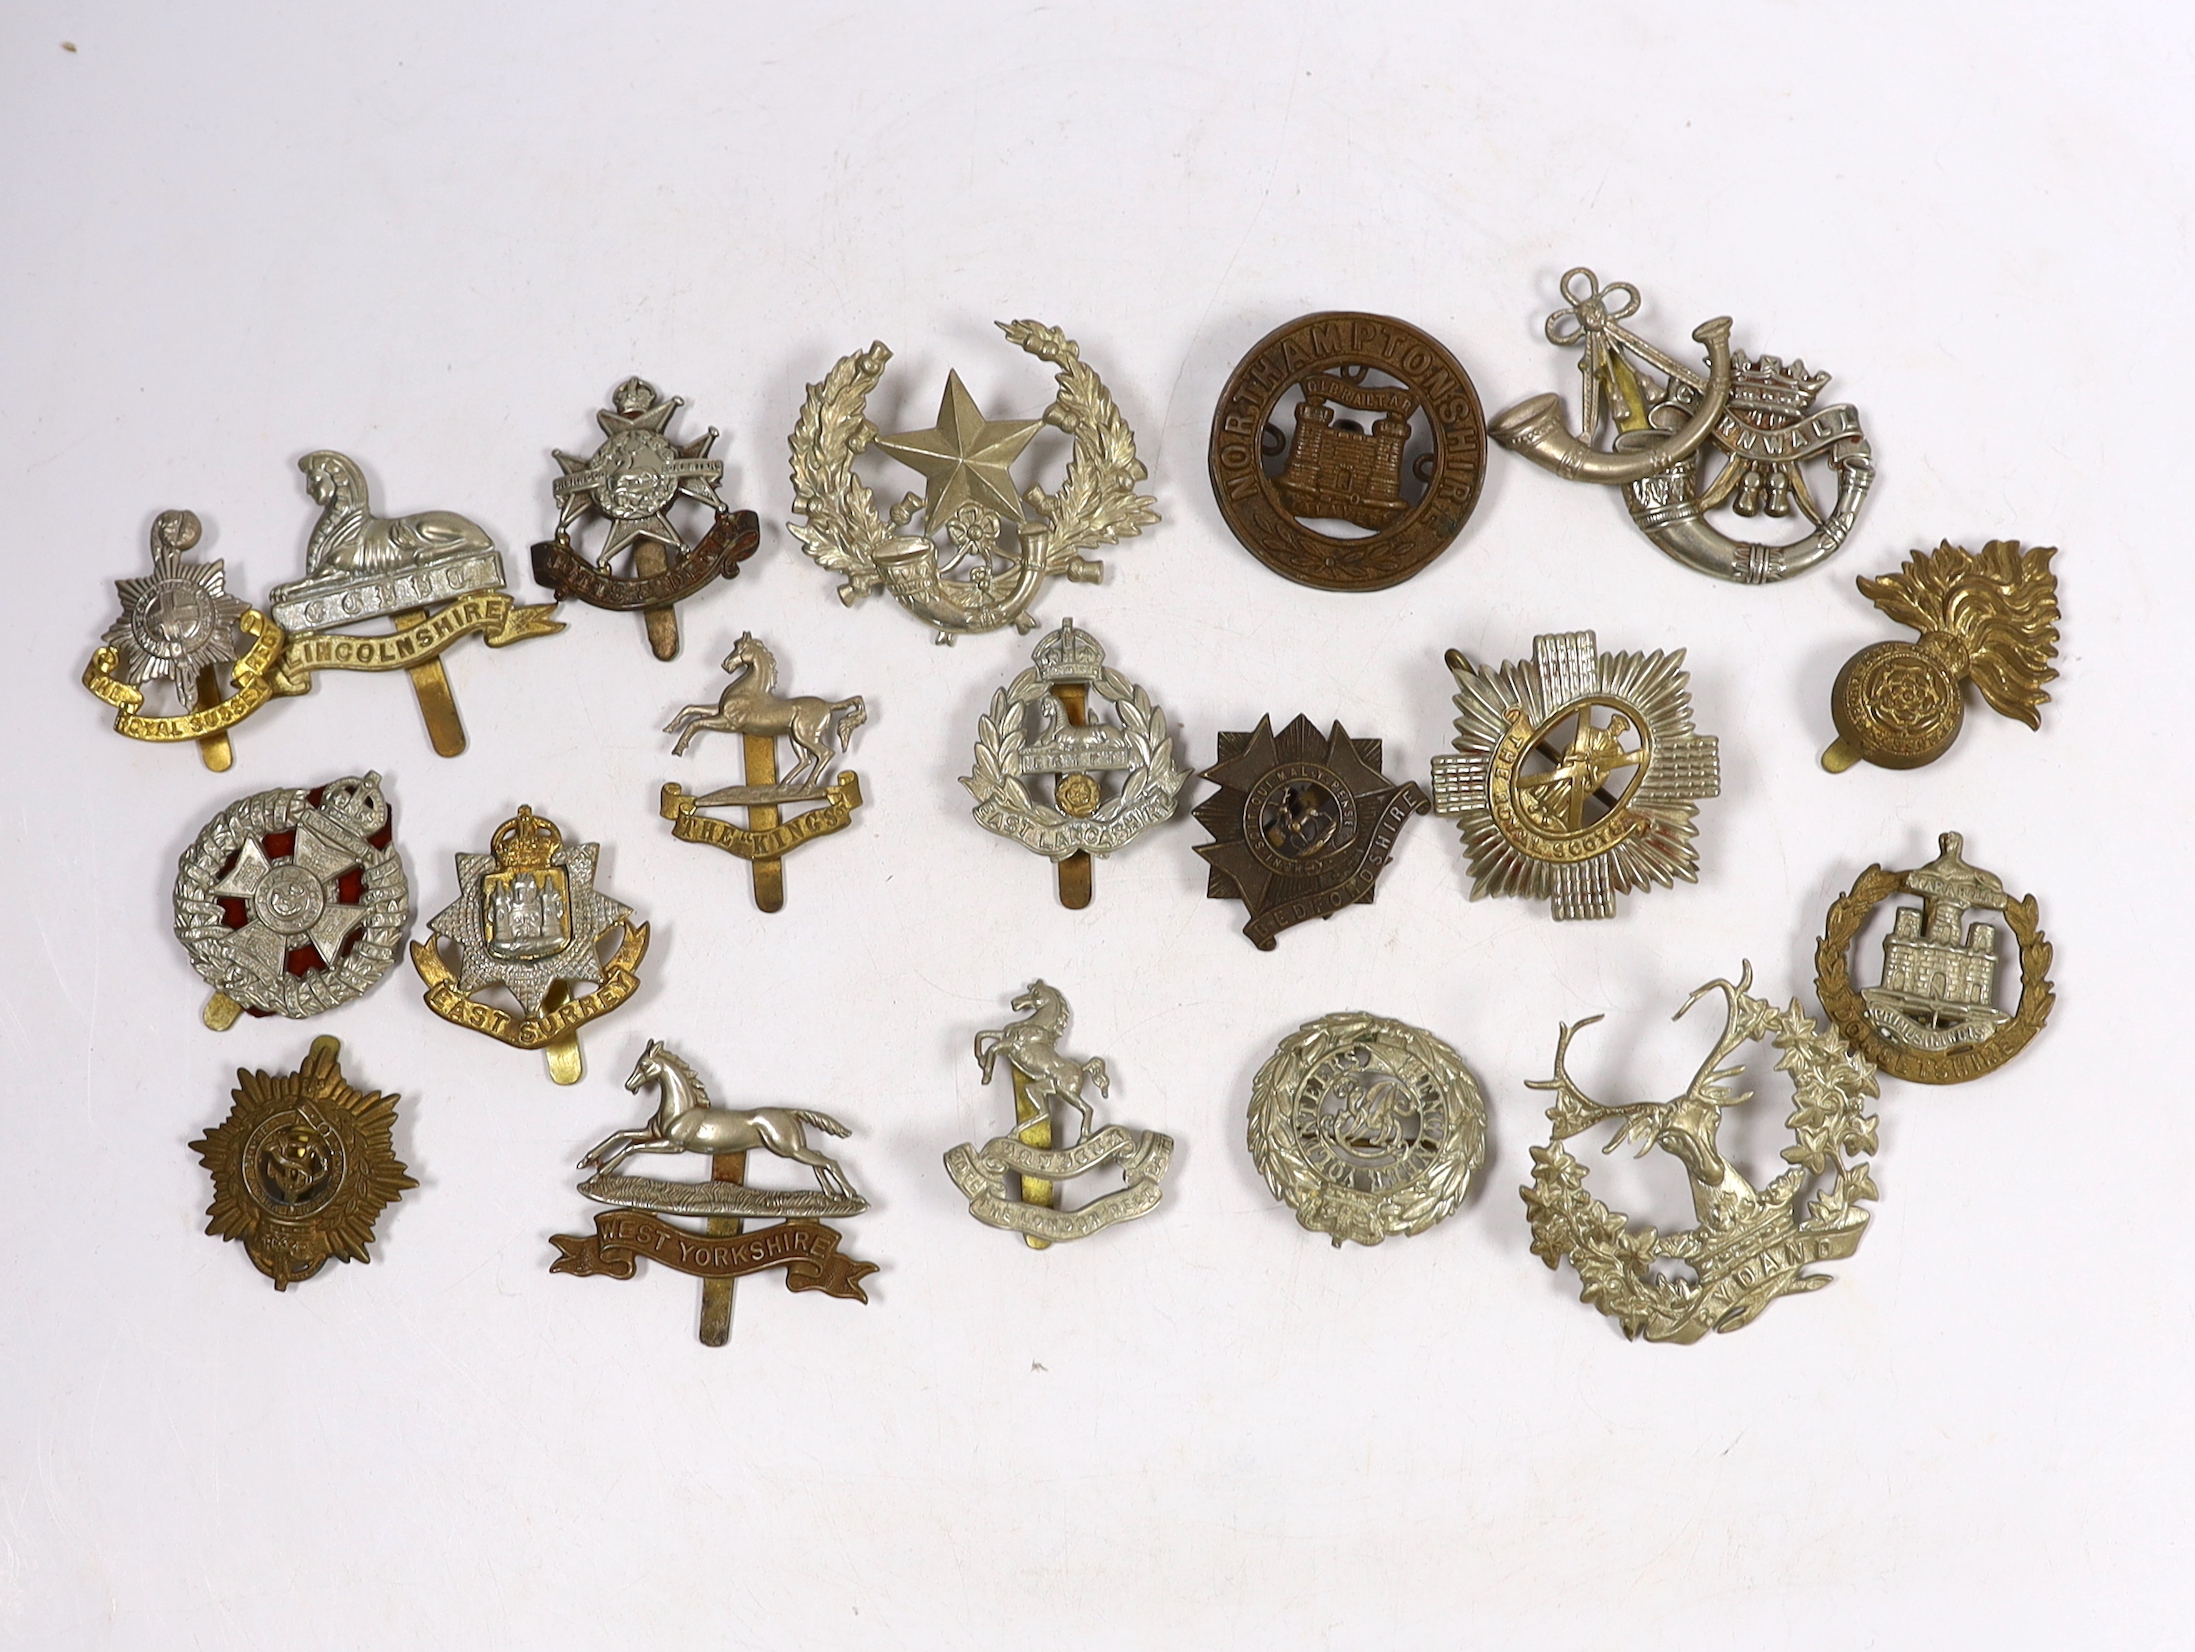 Twenty military cap badges including Bedfordshire, West Yorkshire, Cornwall, East Lancashire, the Royal Scots, the Royal Sussex, Northamptonshire, Lincolnshire, East Surrey, Dorsetshire, Engineer Volunteers, etc.